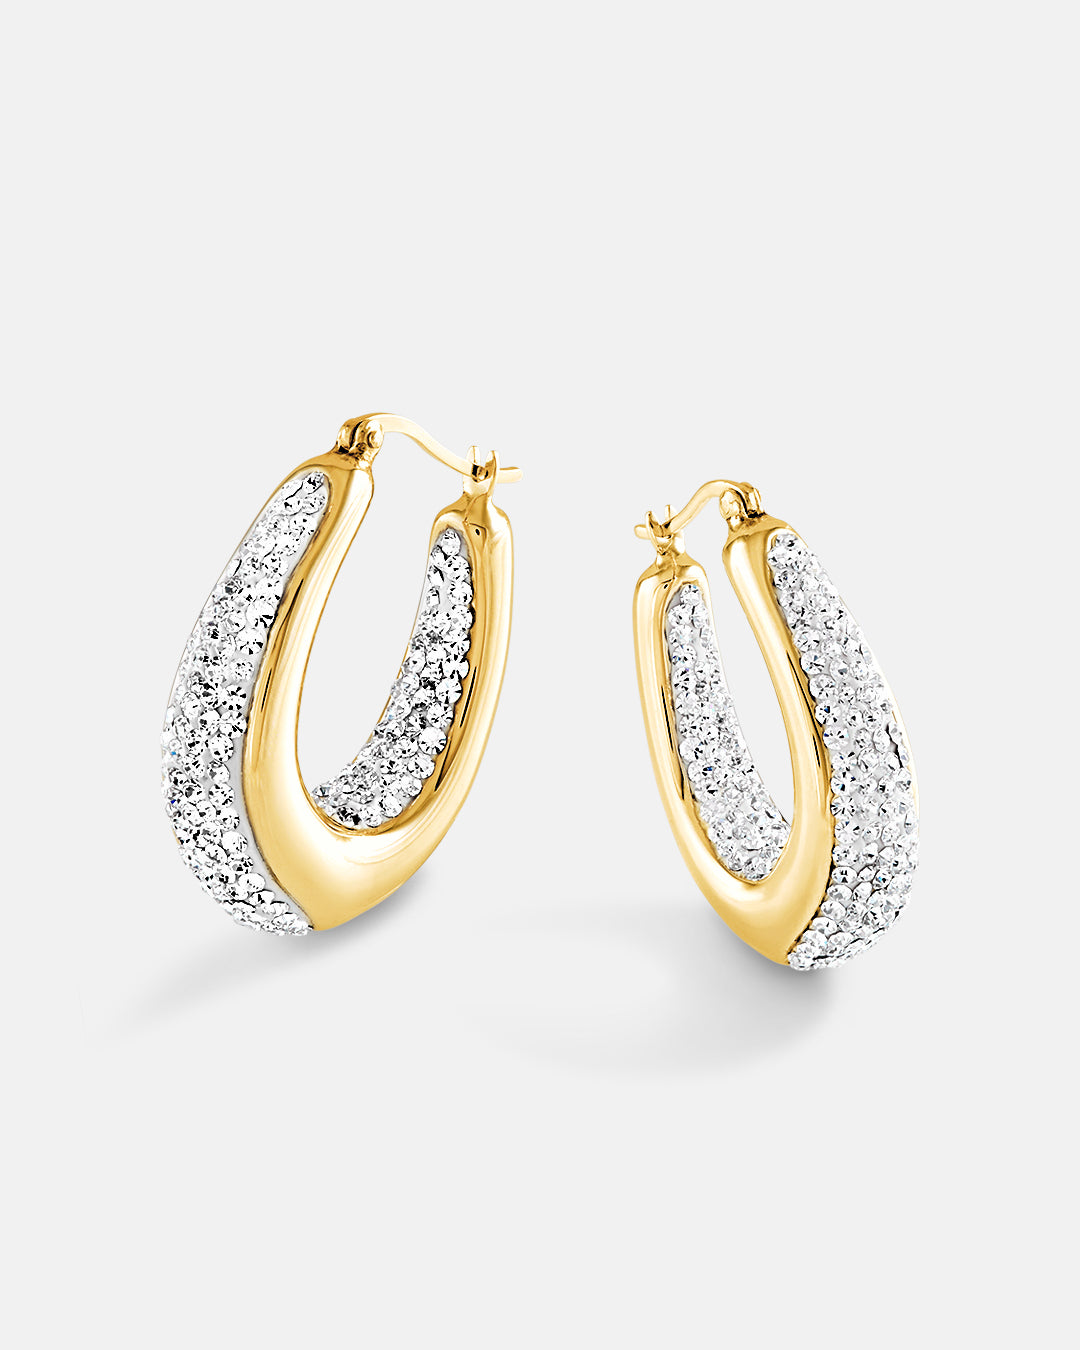 This is the product picture of chunky elegant hoop earrings with crystals plated in gold in sterling silver material